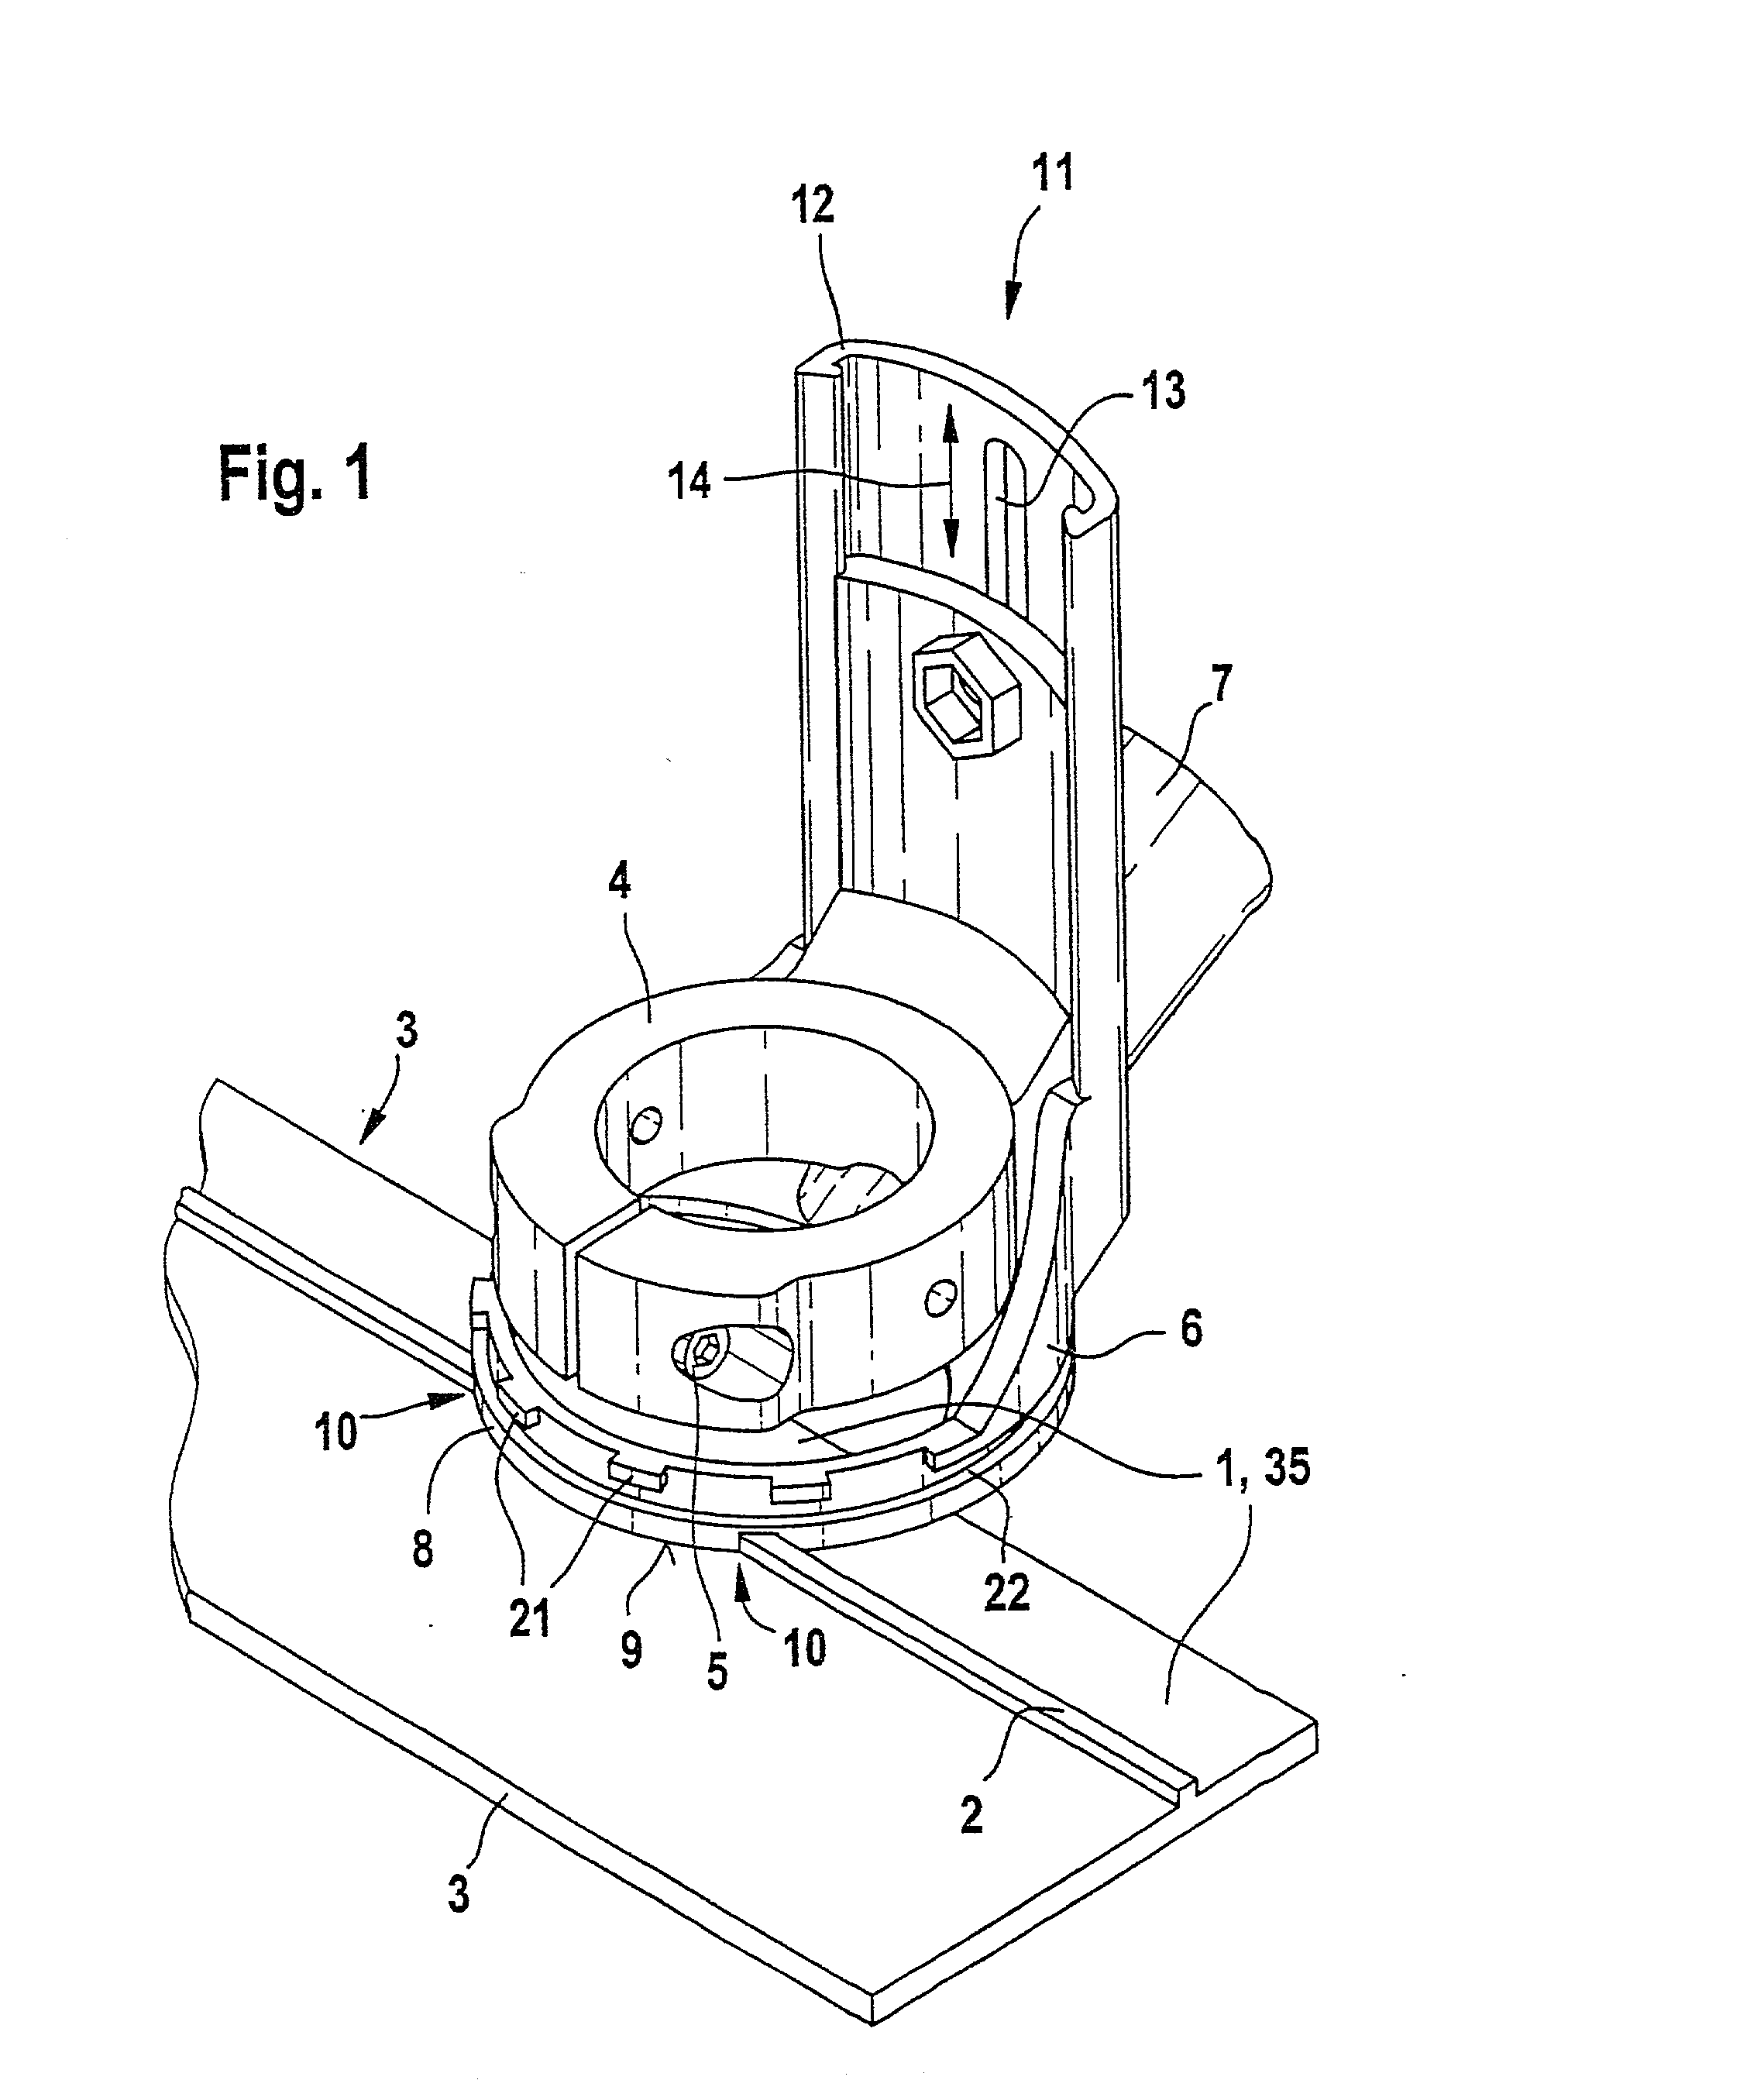 Electric tool comprising a universal mounting for tool attachments